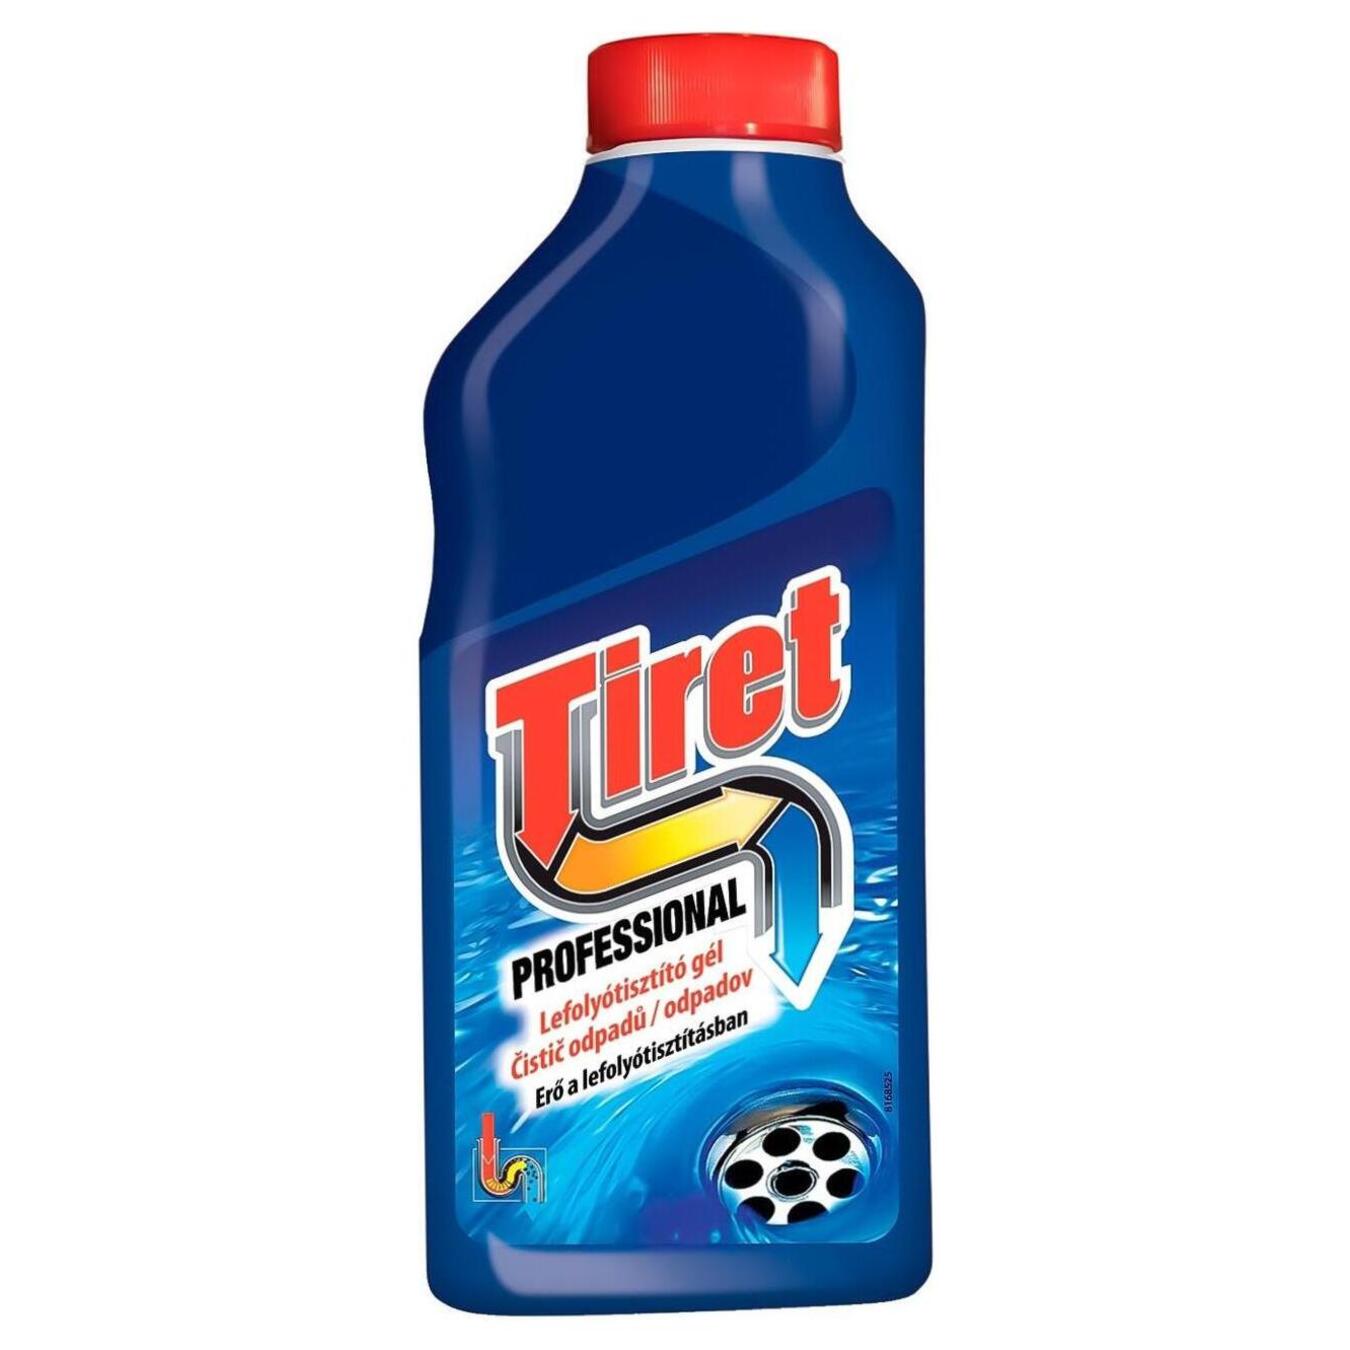 Tiret Liquid Remedy for Cleaning Sewage Pipes 500ml